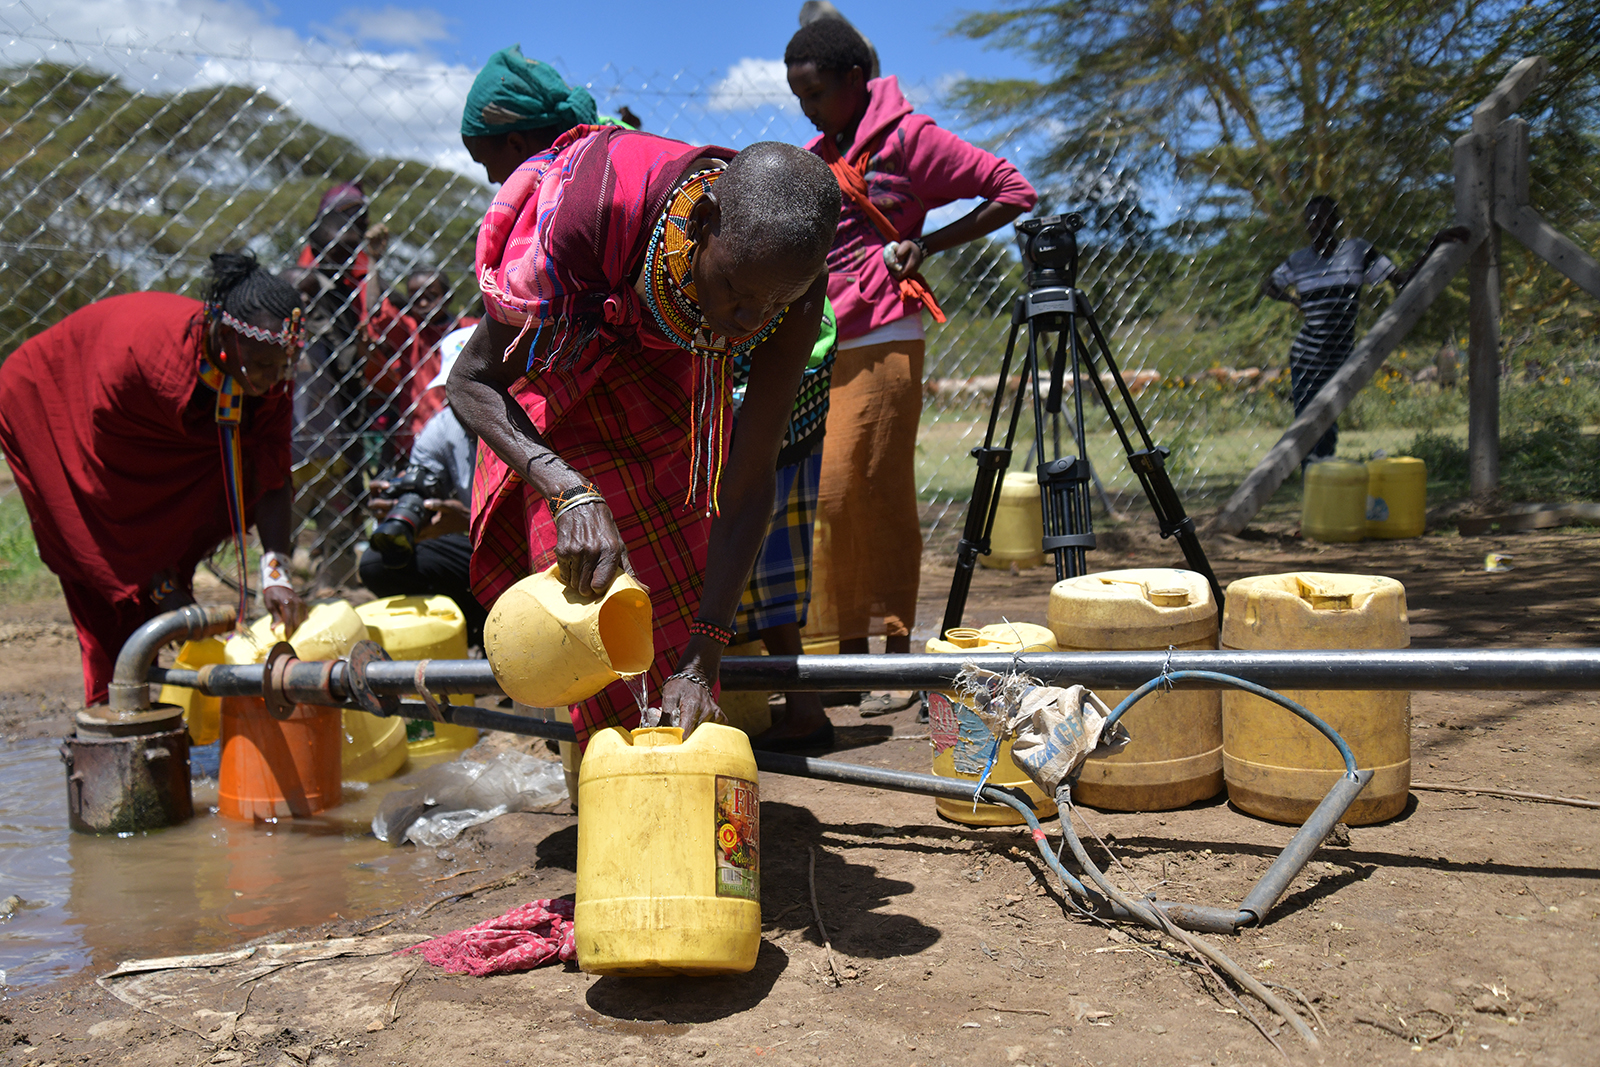 Photo: Women gathering water in an area severely affected by drought